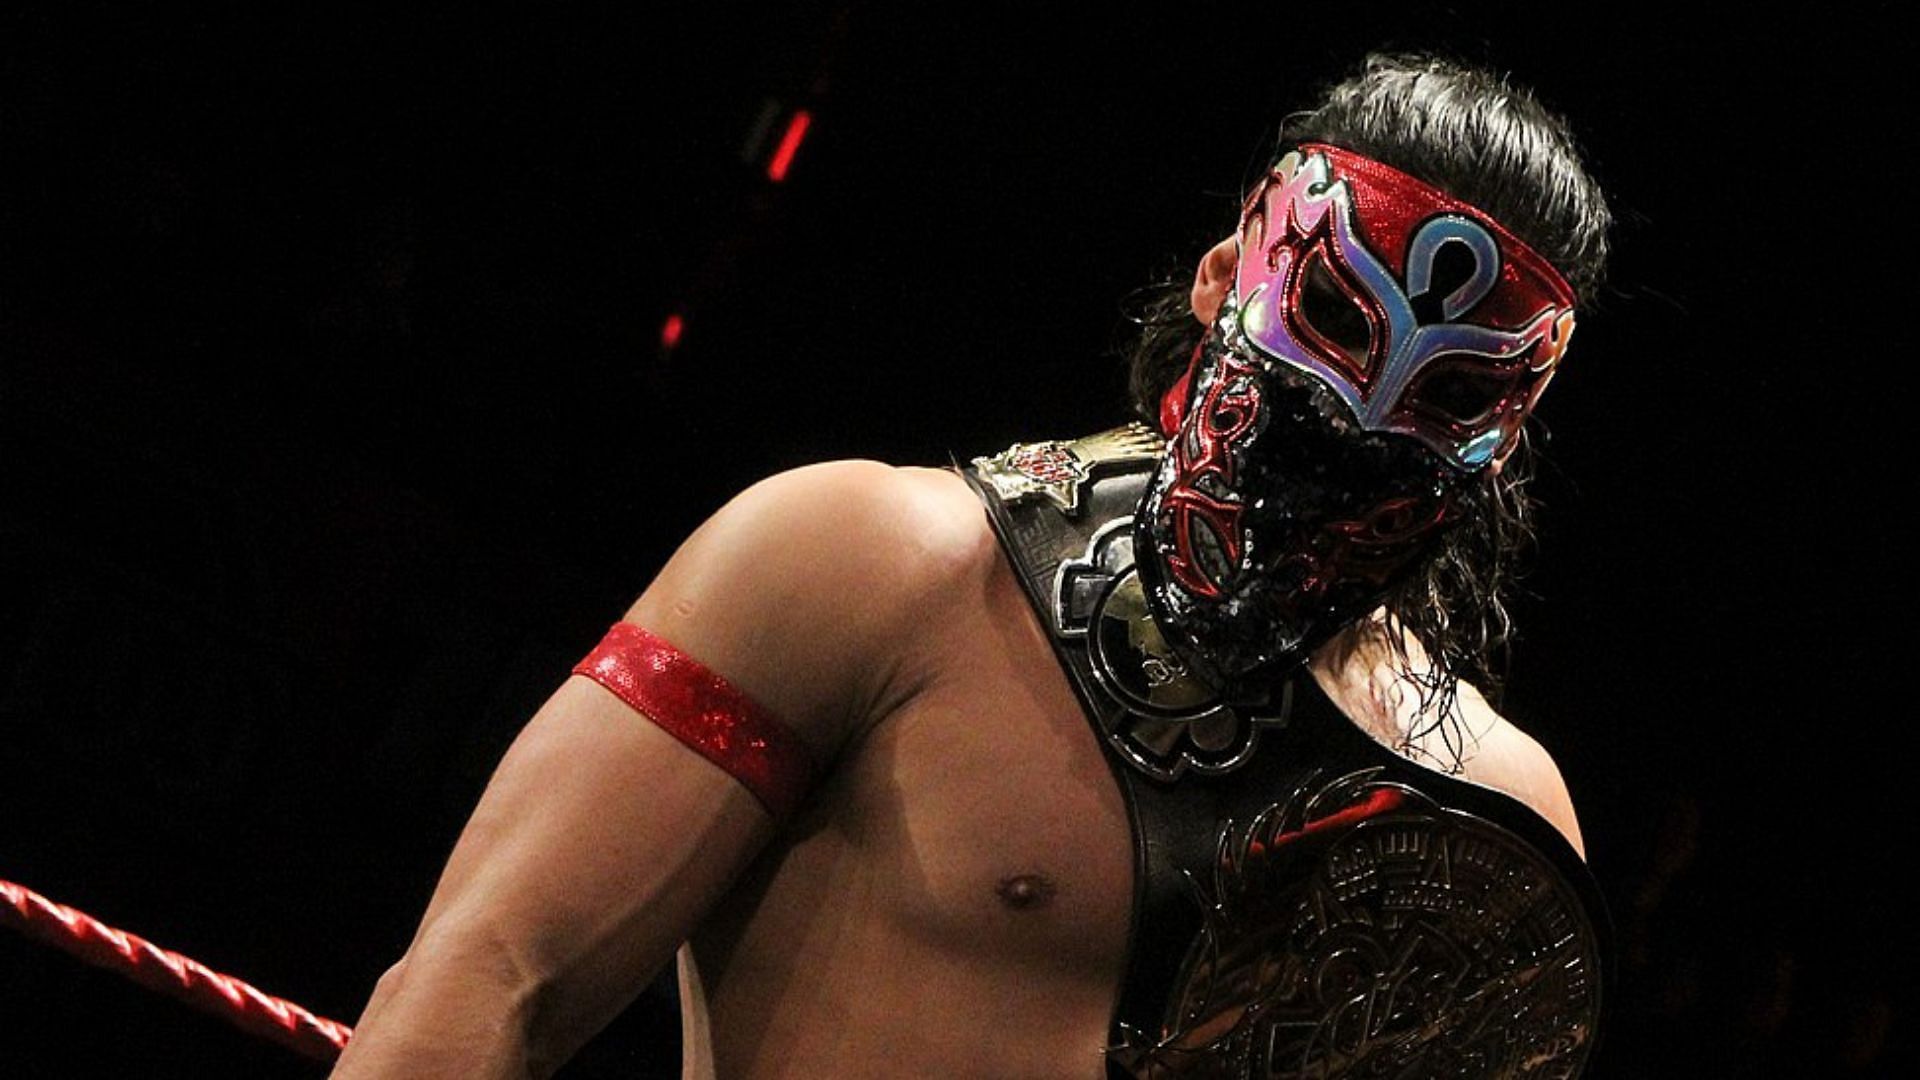 Bandido will fight for the ROH World Championship